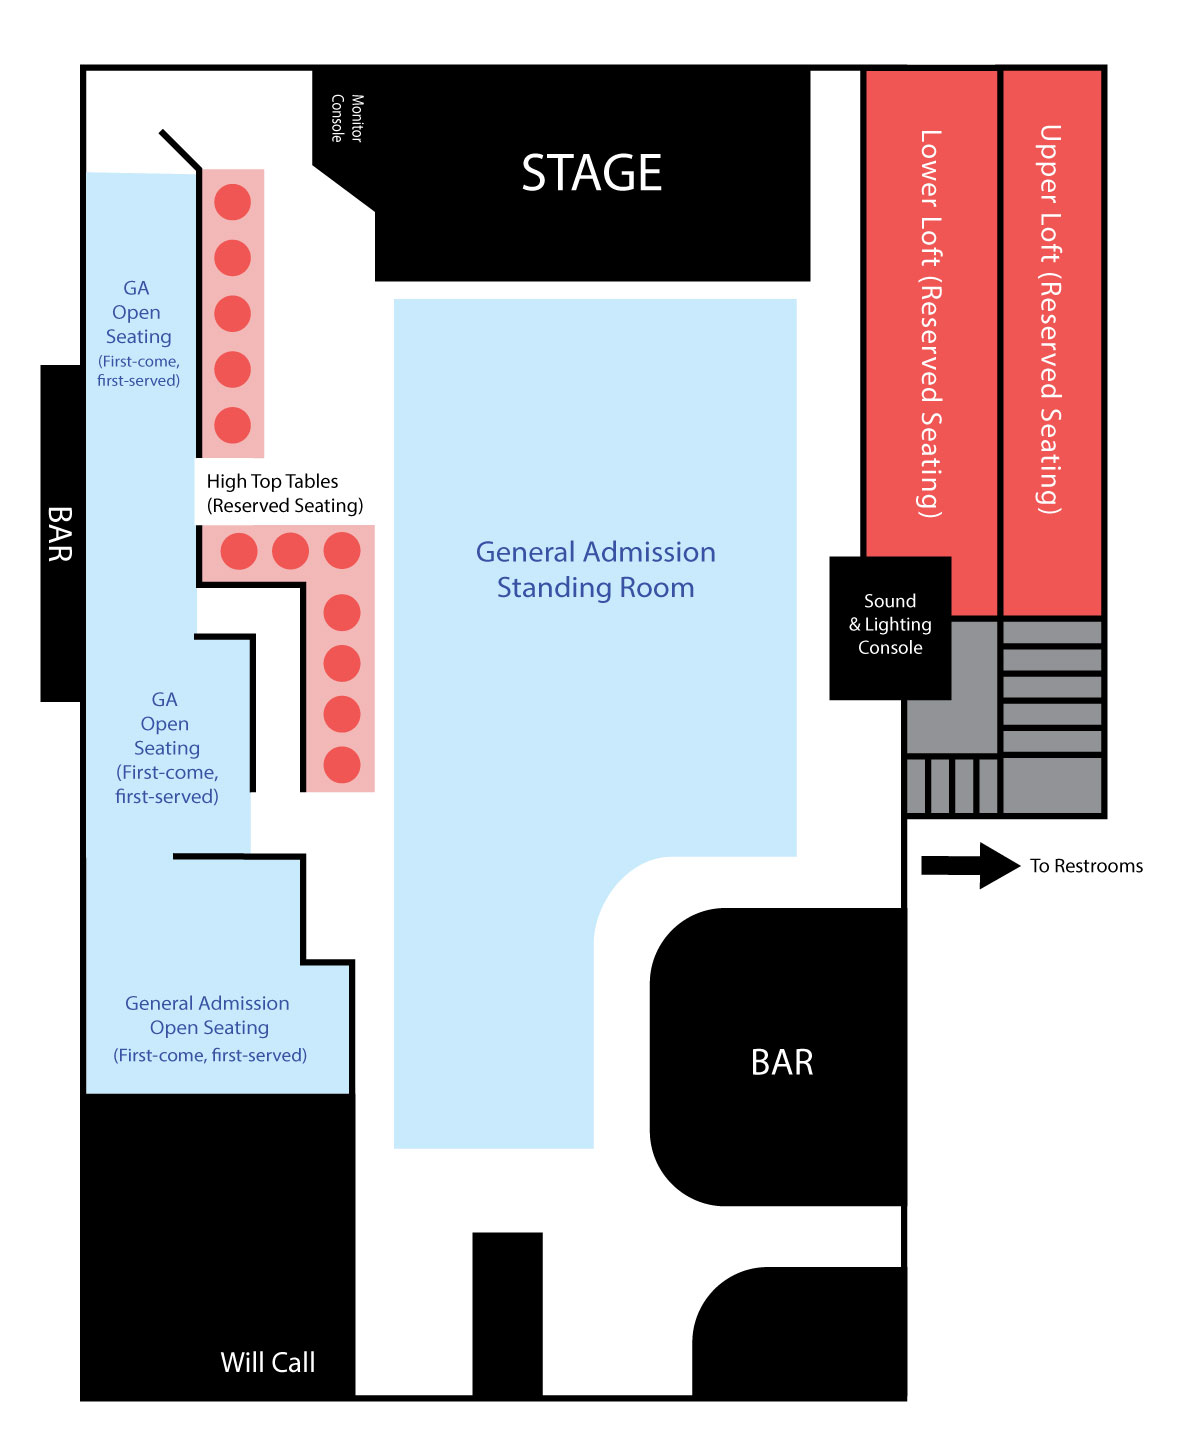 Belly Up Tavern Event Seating Chart